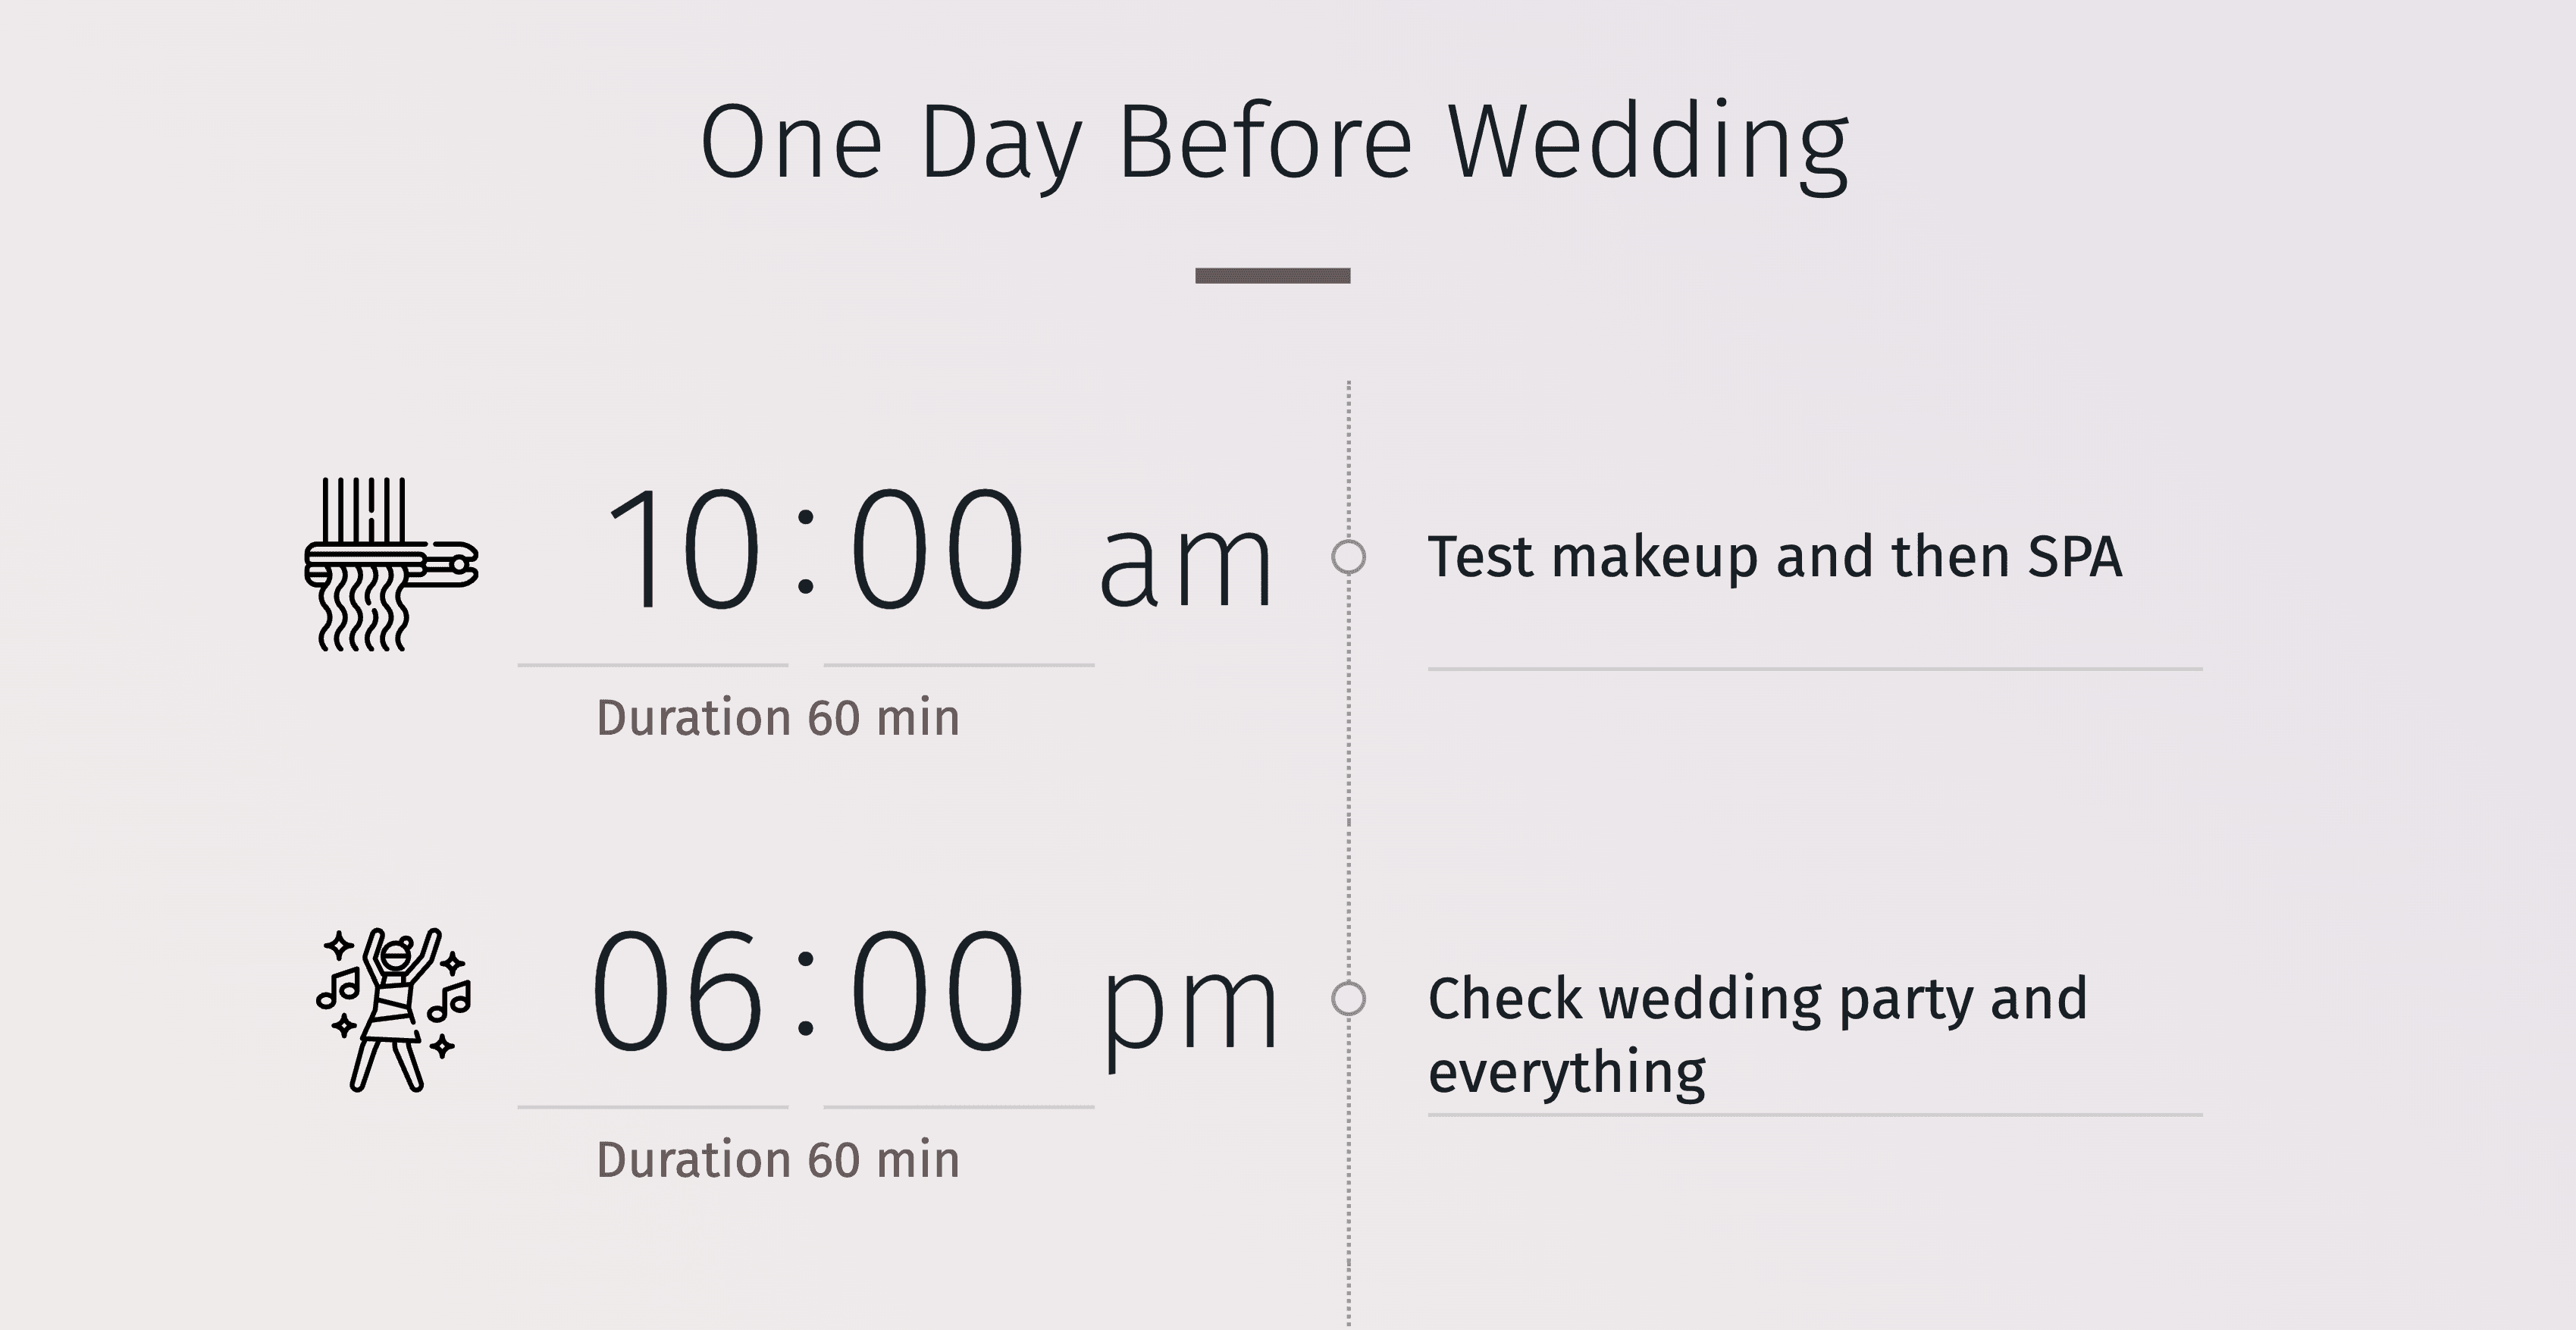 Printable wedding day schedule template with editable fields.